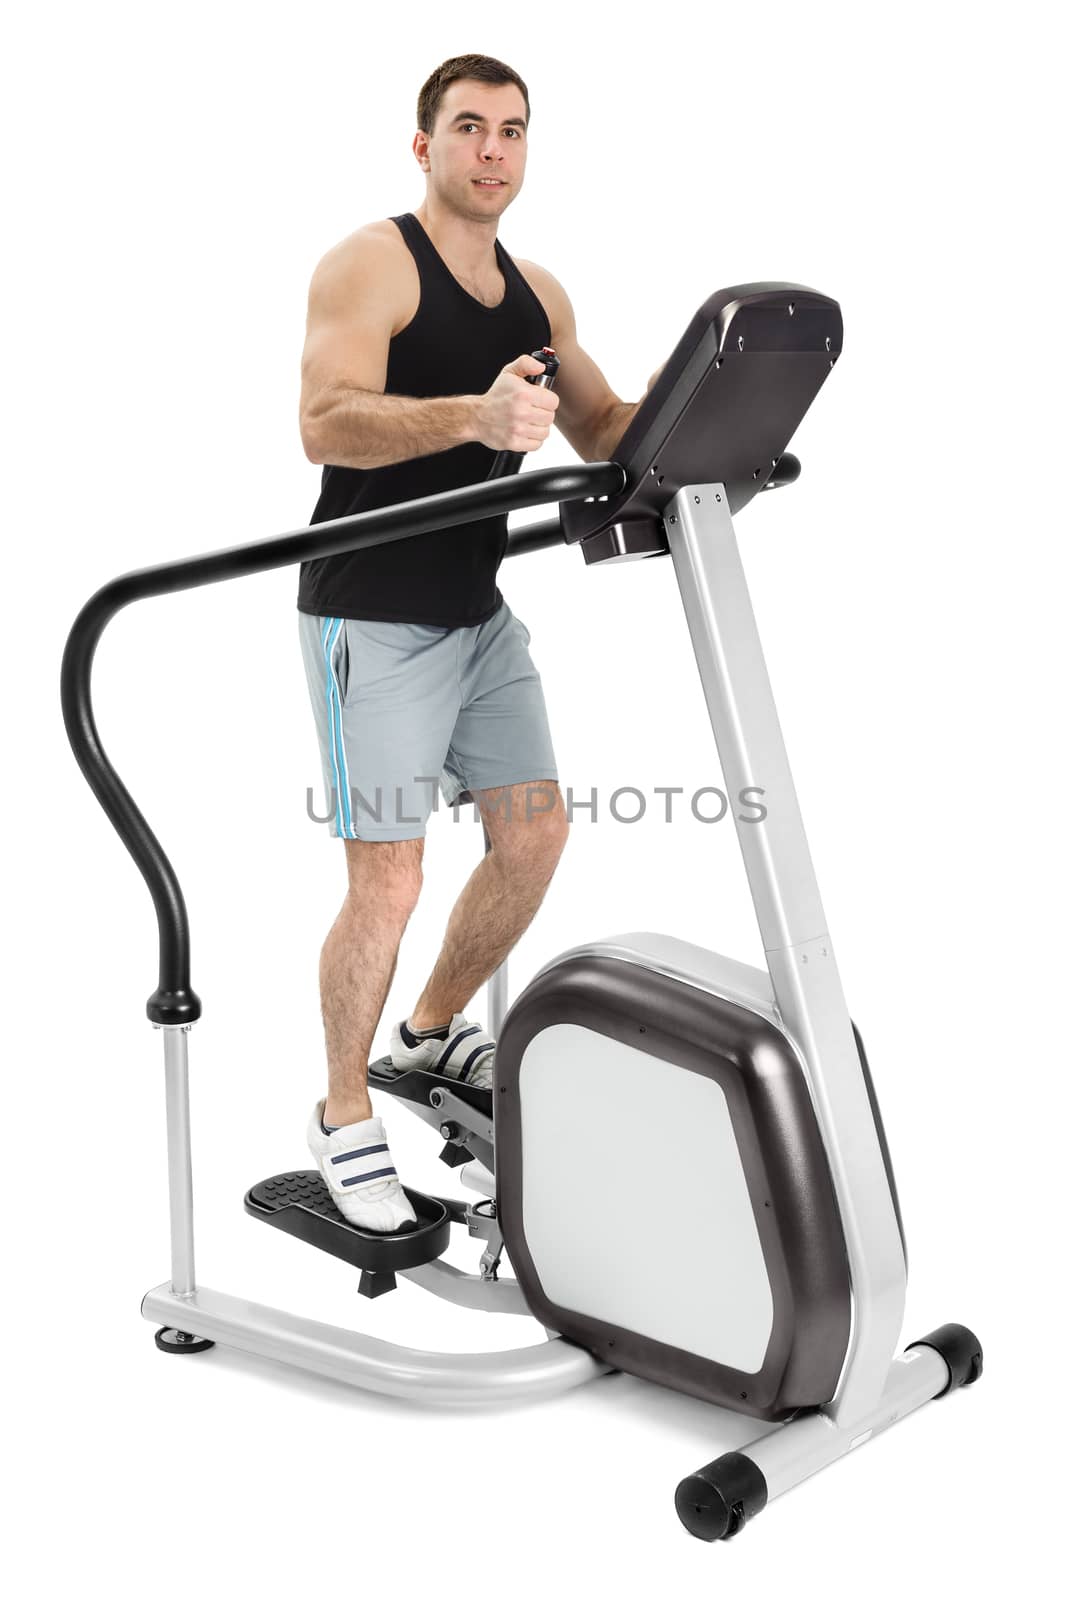 one man doing step machine exercise by starush